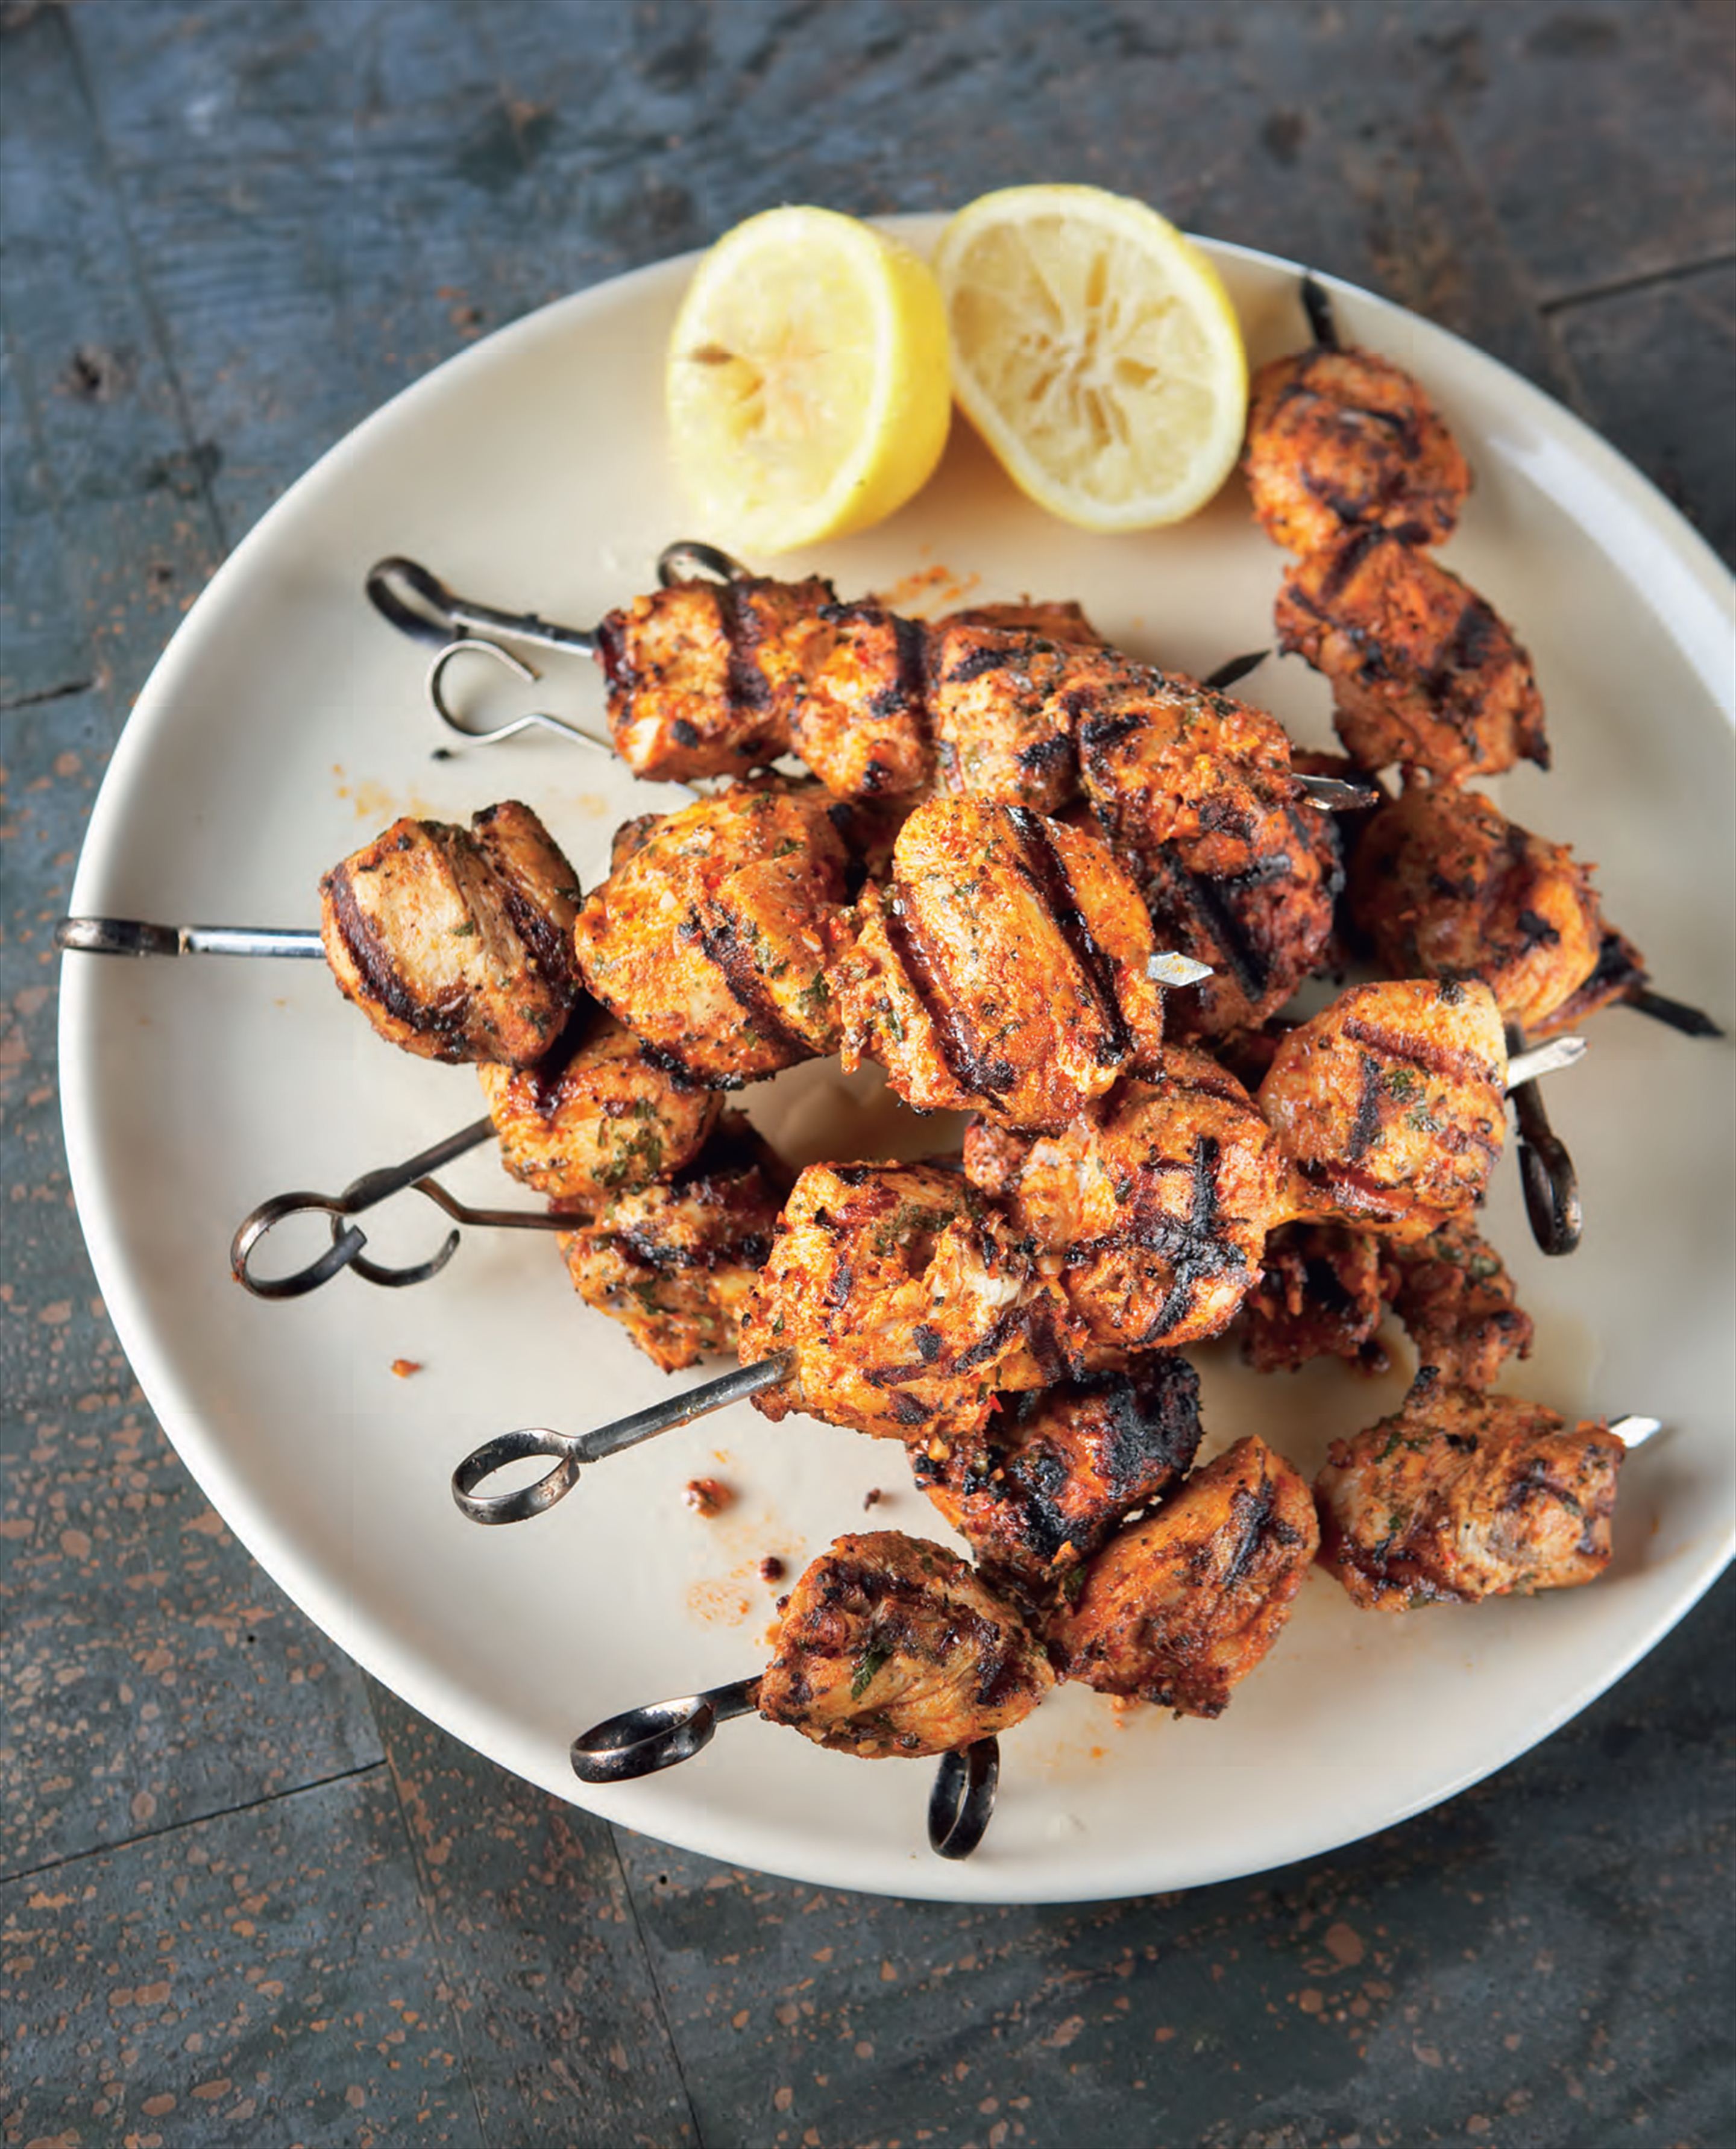 Portuguese-style barbecued chicken skewers